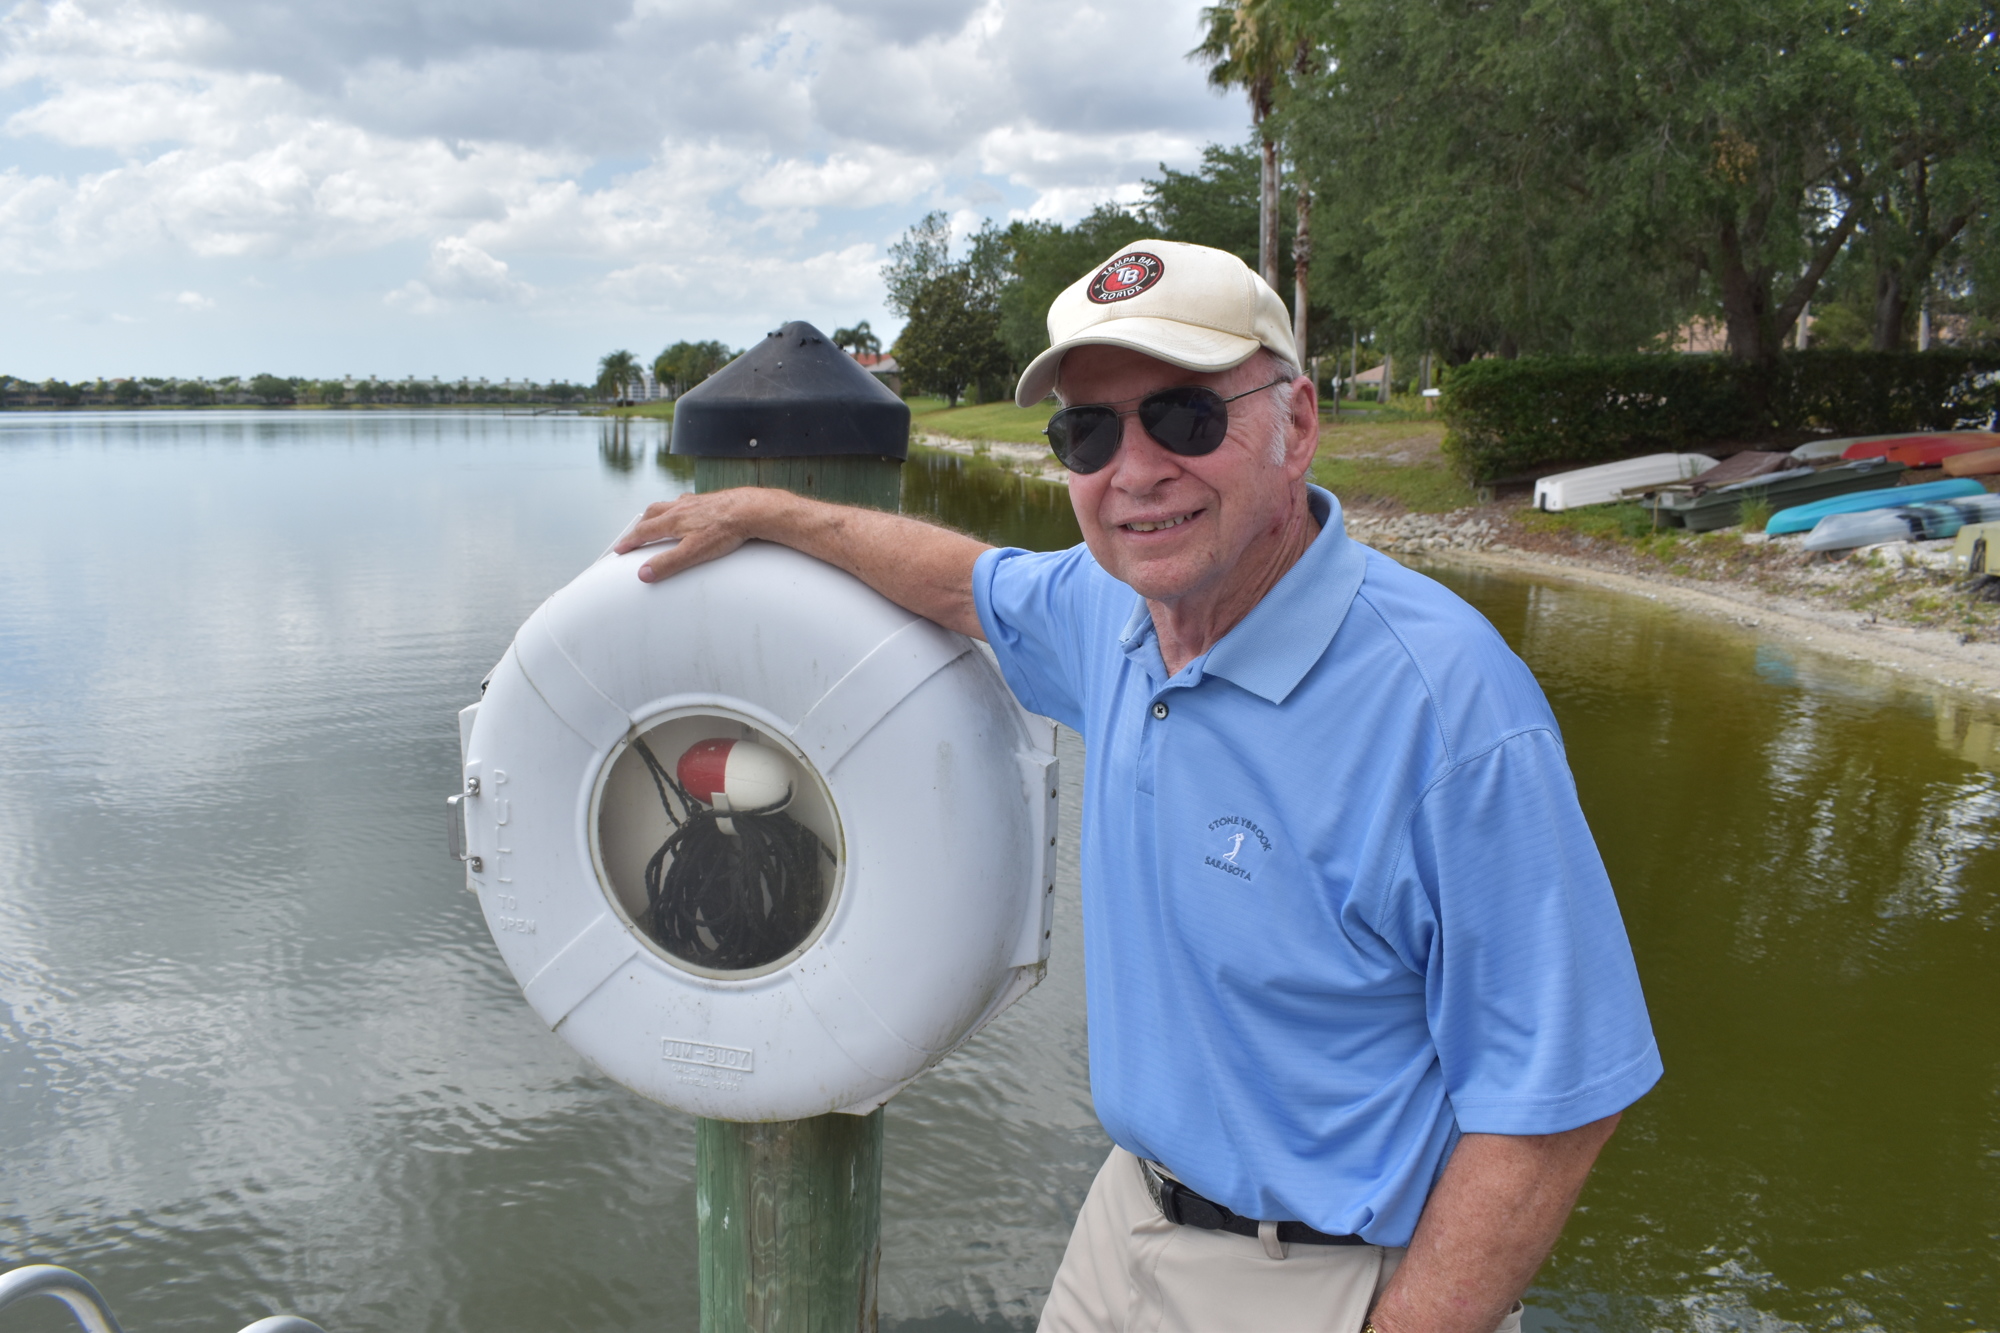 Charles Haeussner hopes that sailing on Lake Uihlein will continue.